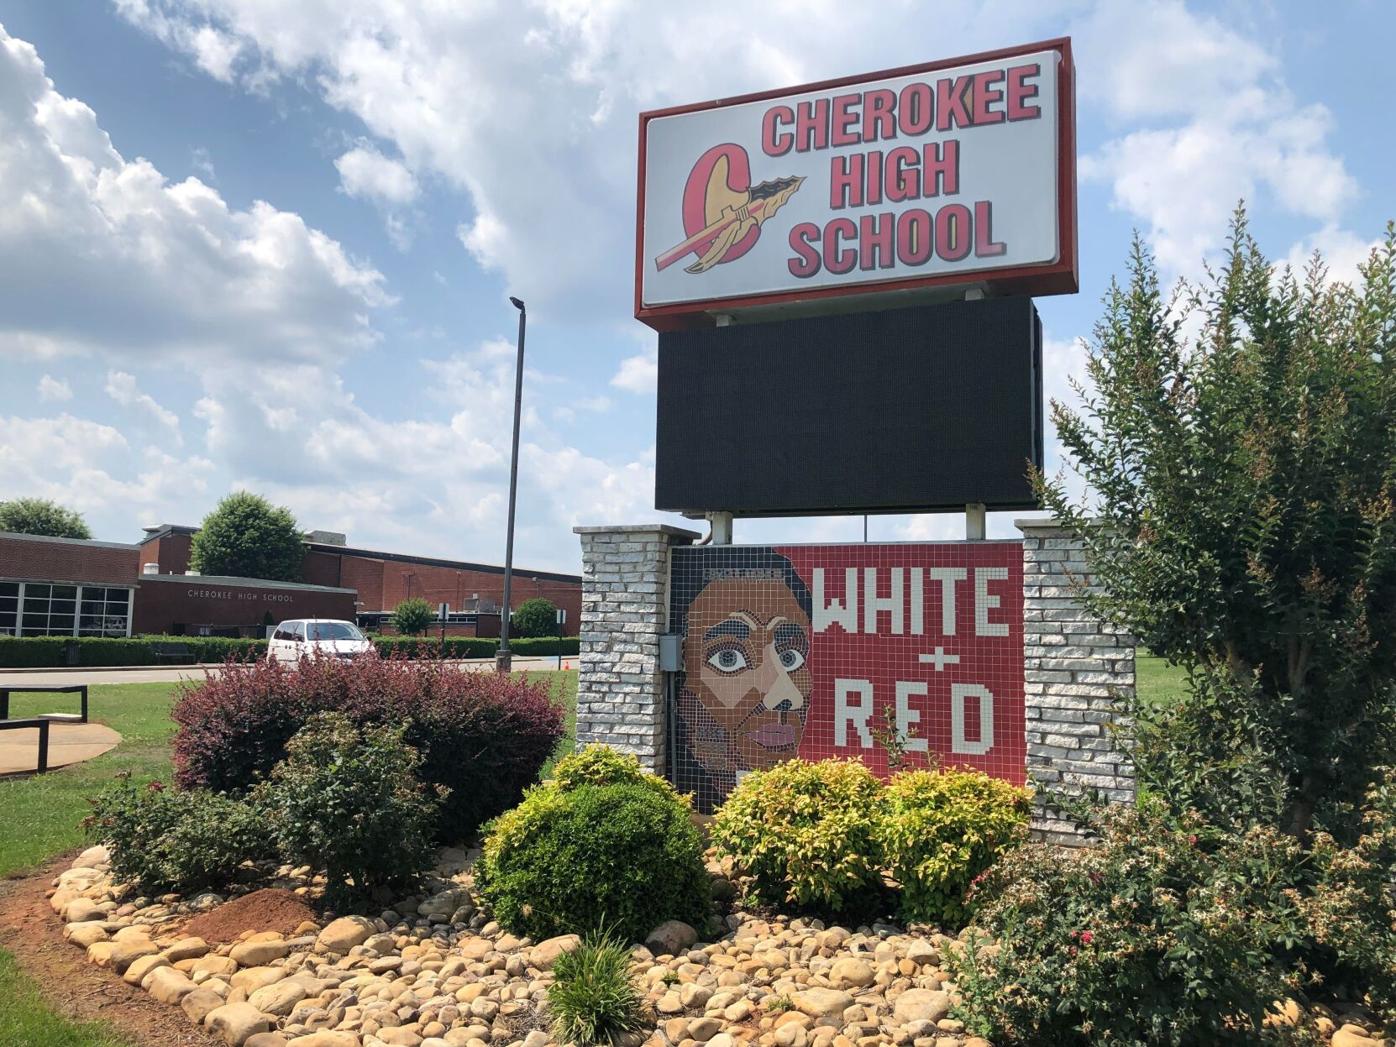 School board approves site work contract for new Cherokee High School, Education